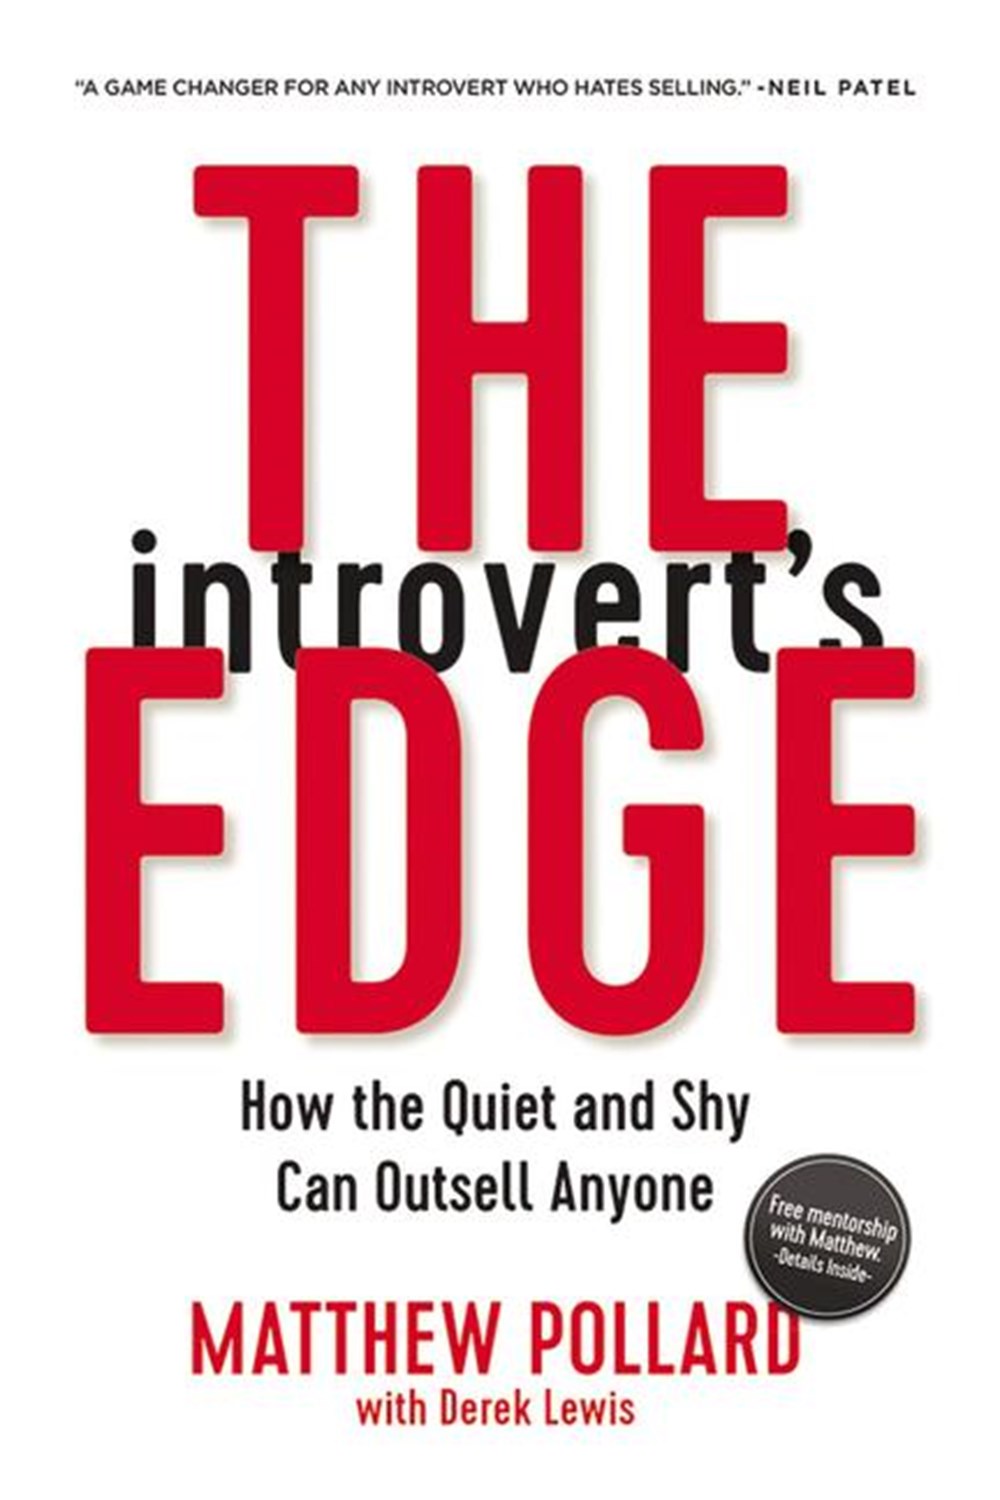 Introvert's Edge: How the Quiet and Shy Can Outsell Anyone